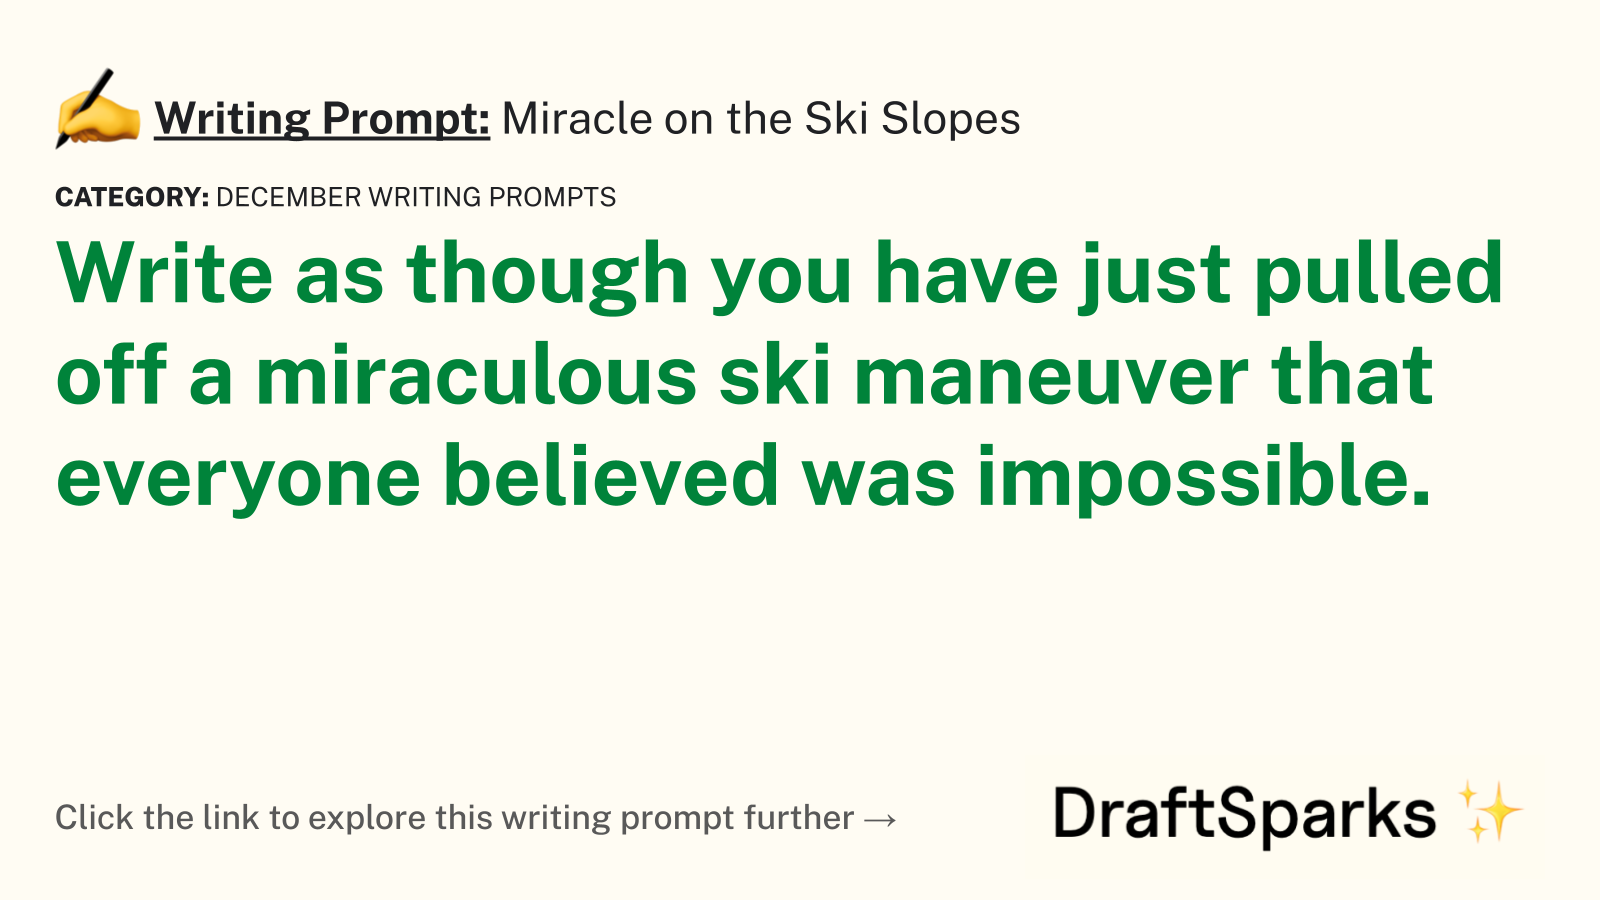 Miracle on the Ski Slopes